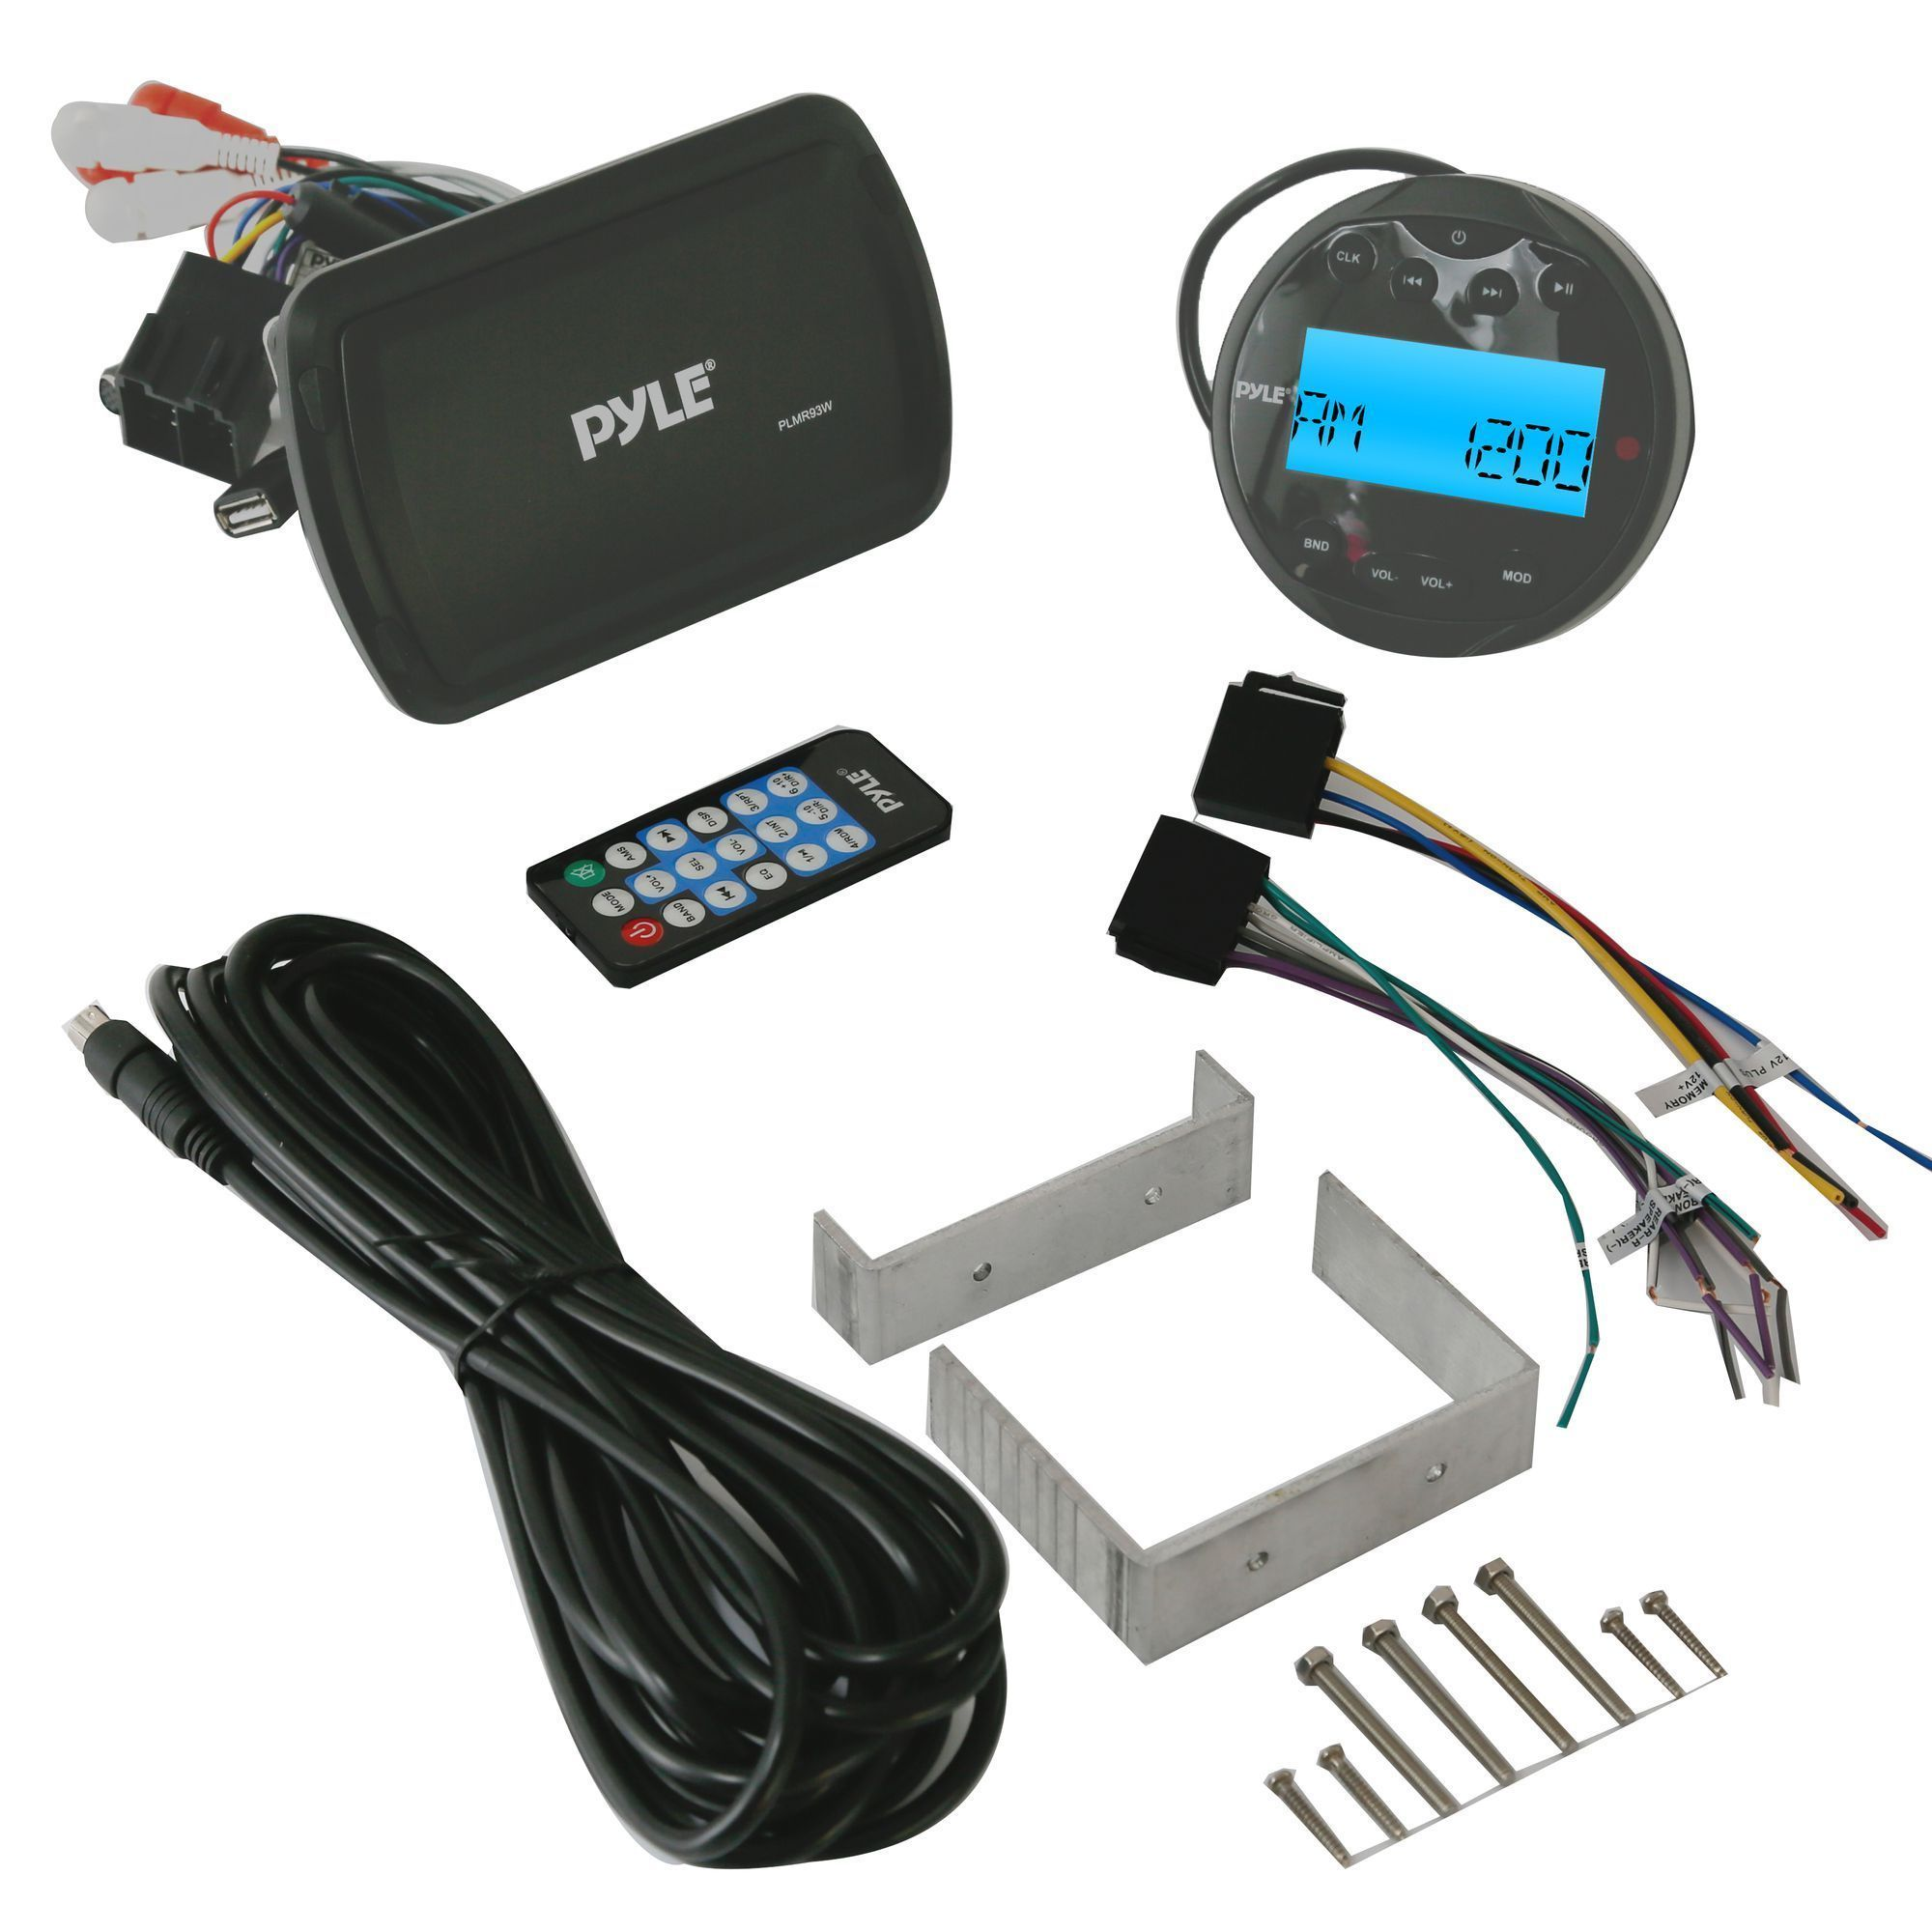 Pyle Bluetooth Stereo Boat Receiver System, Wired Control Unit, Waterproof, AM/FM Radio, (PLMR93W)